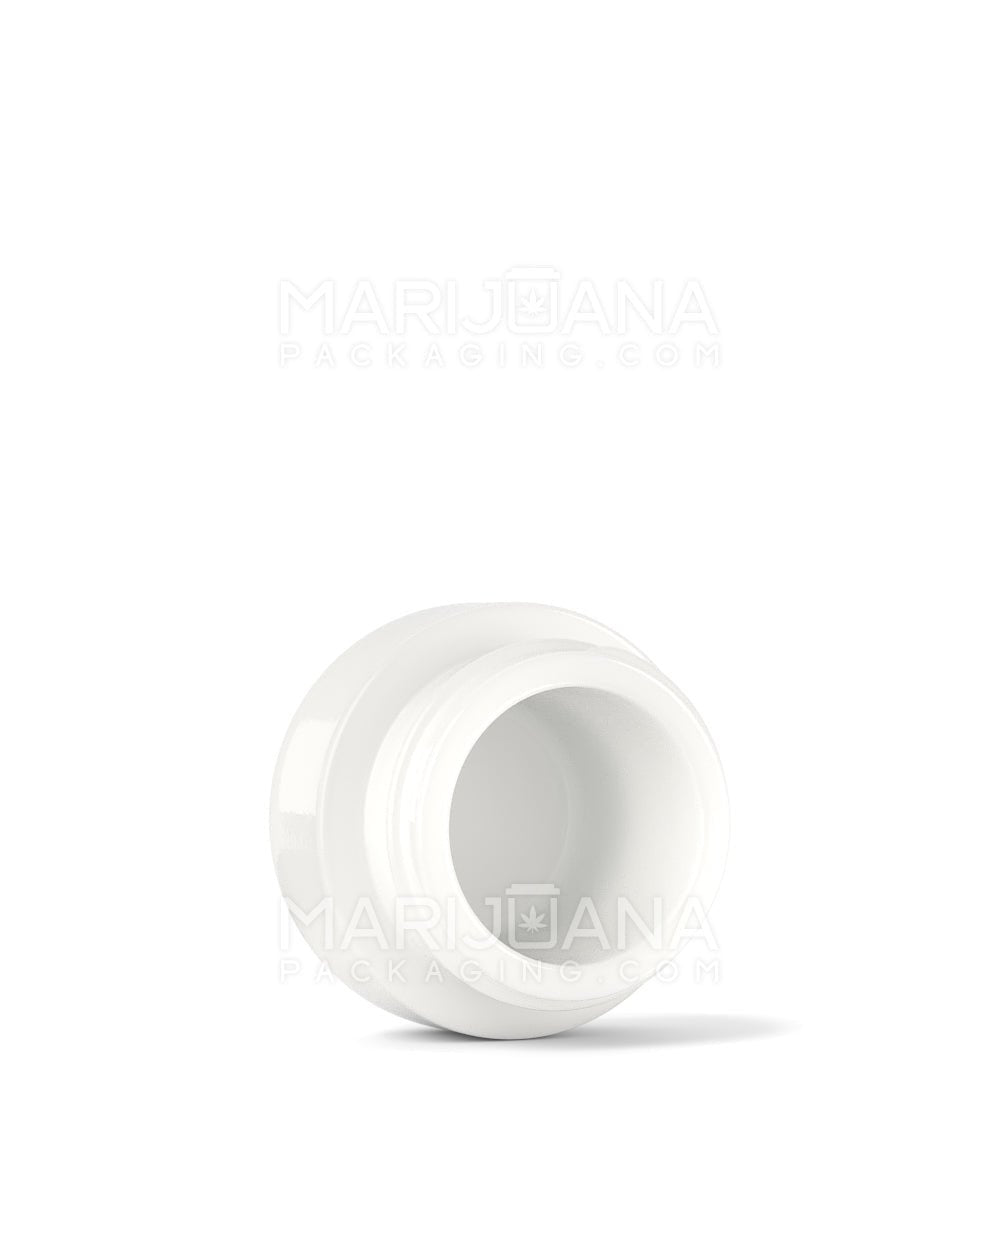 POLLEN GEAR | HiLine Glossy White Glass Concentrate Containers | 28mm - 5mL - 308 Count - 3